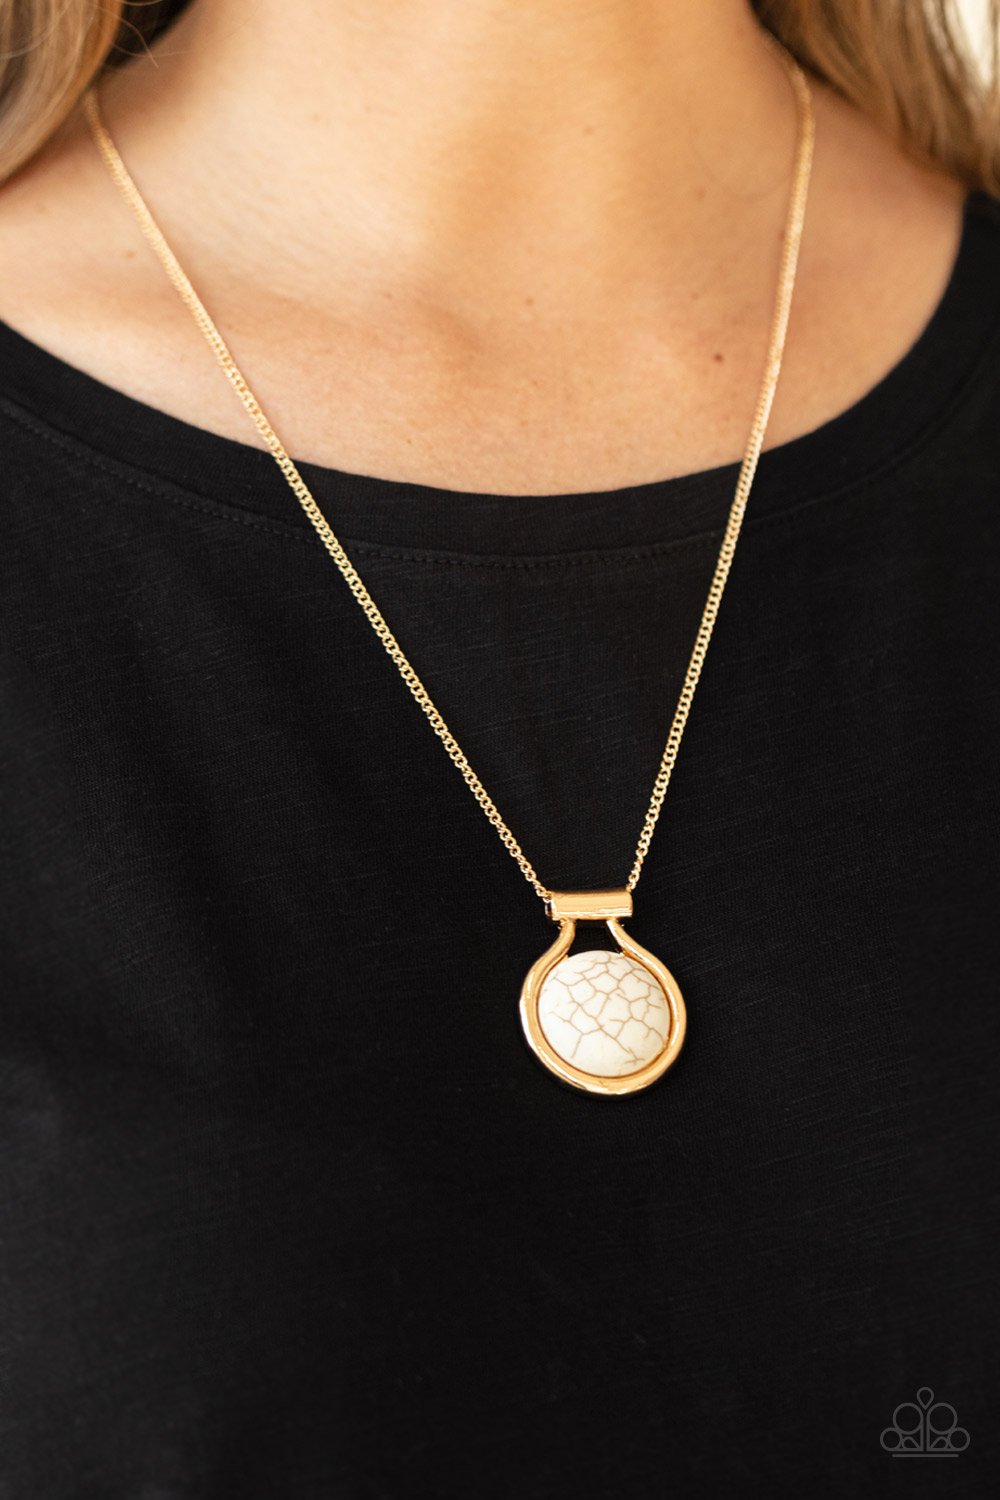 &lt;p&gt;Encased in an artisan inspired gold fitting, a refreshing white stone pendant glides along a gold chain for a colorfully seasonal look. Features an adjustable clasp closure.
 &lt;/p&gt;

&lt;p&gt;&lt;i&gt; Sold as one individual necklace.  Includes one pair of matching earrings&lt;/i&gt;&lt;/p&gt;